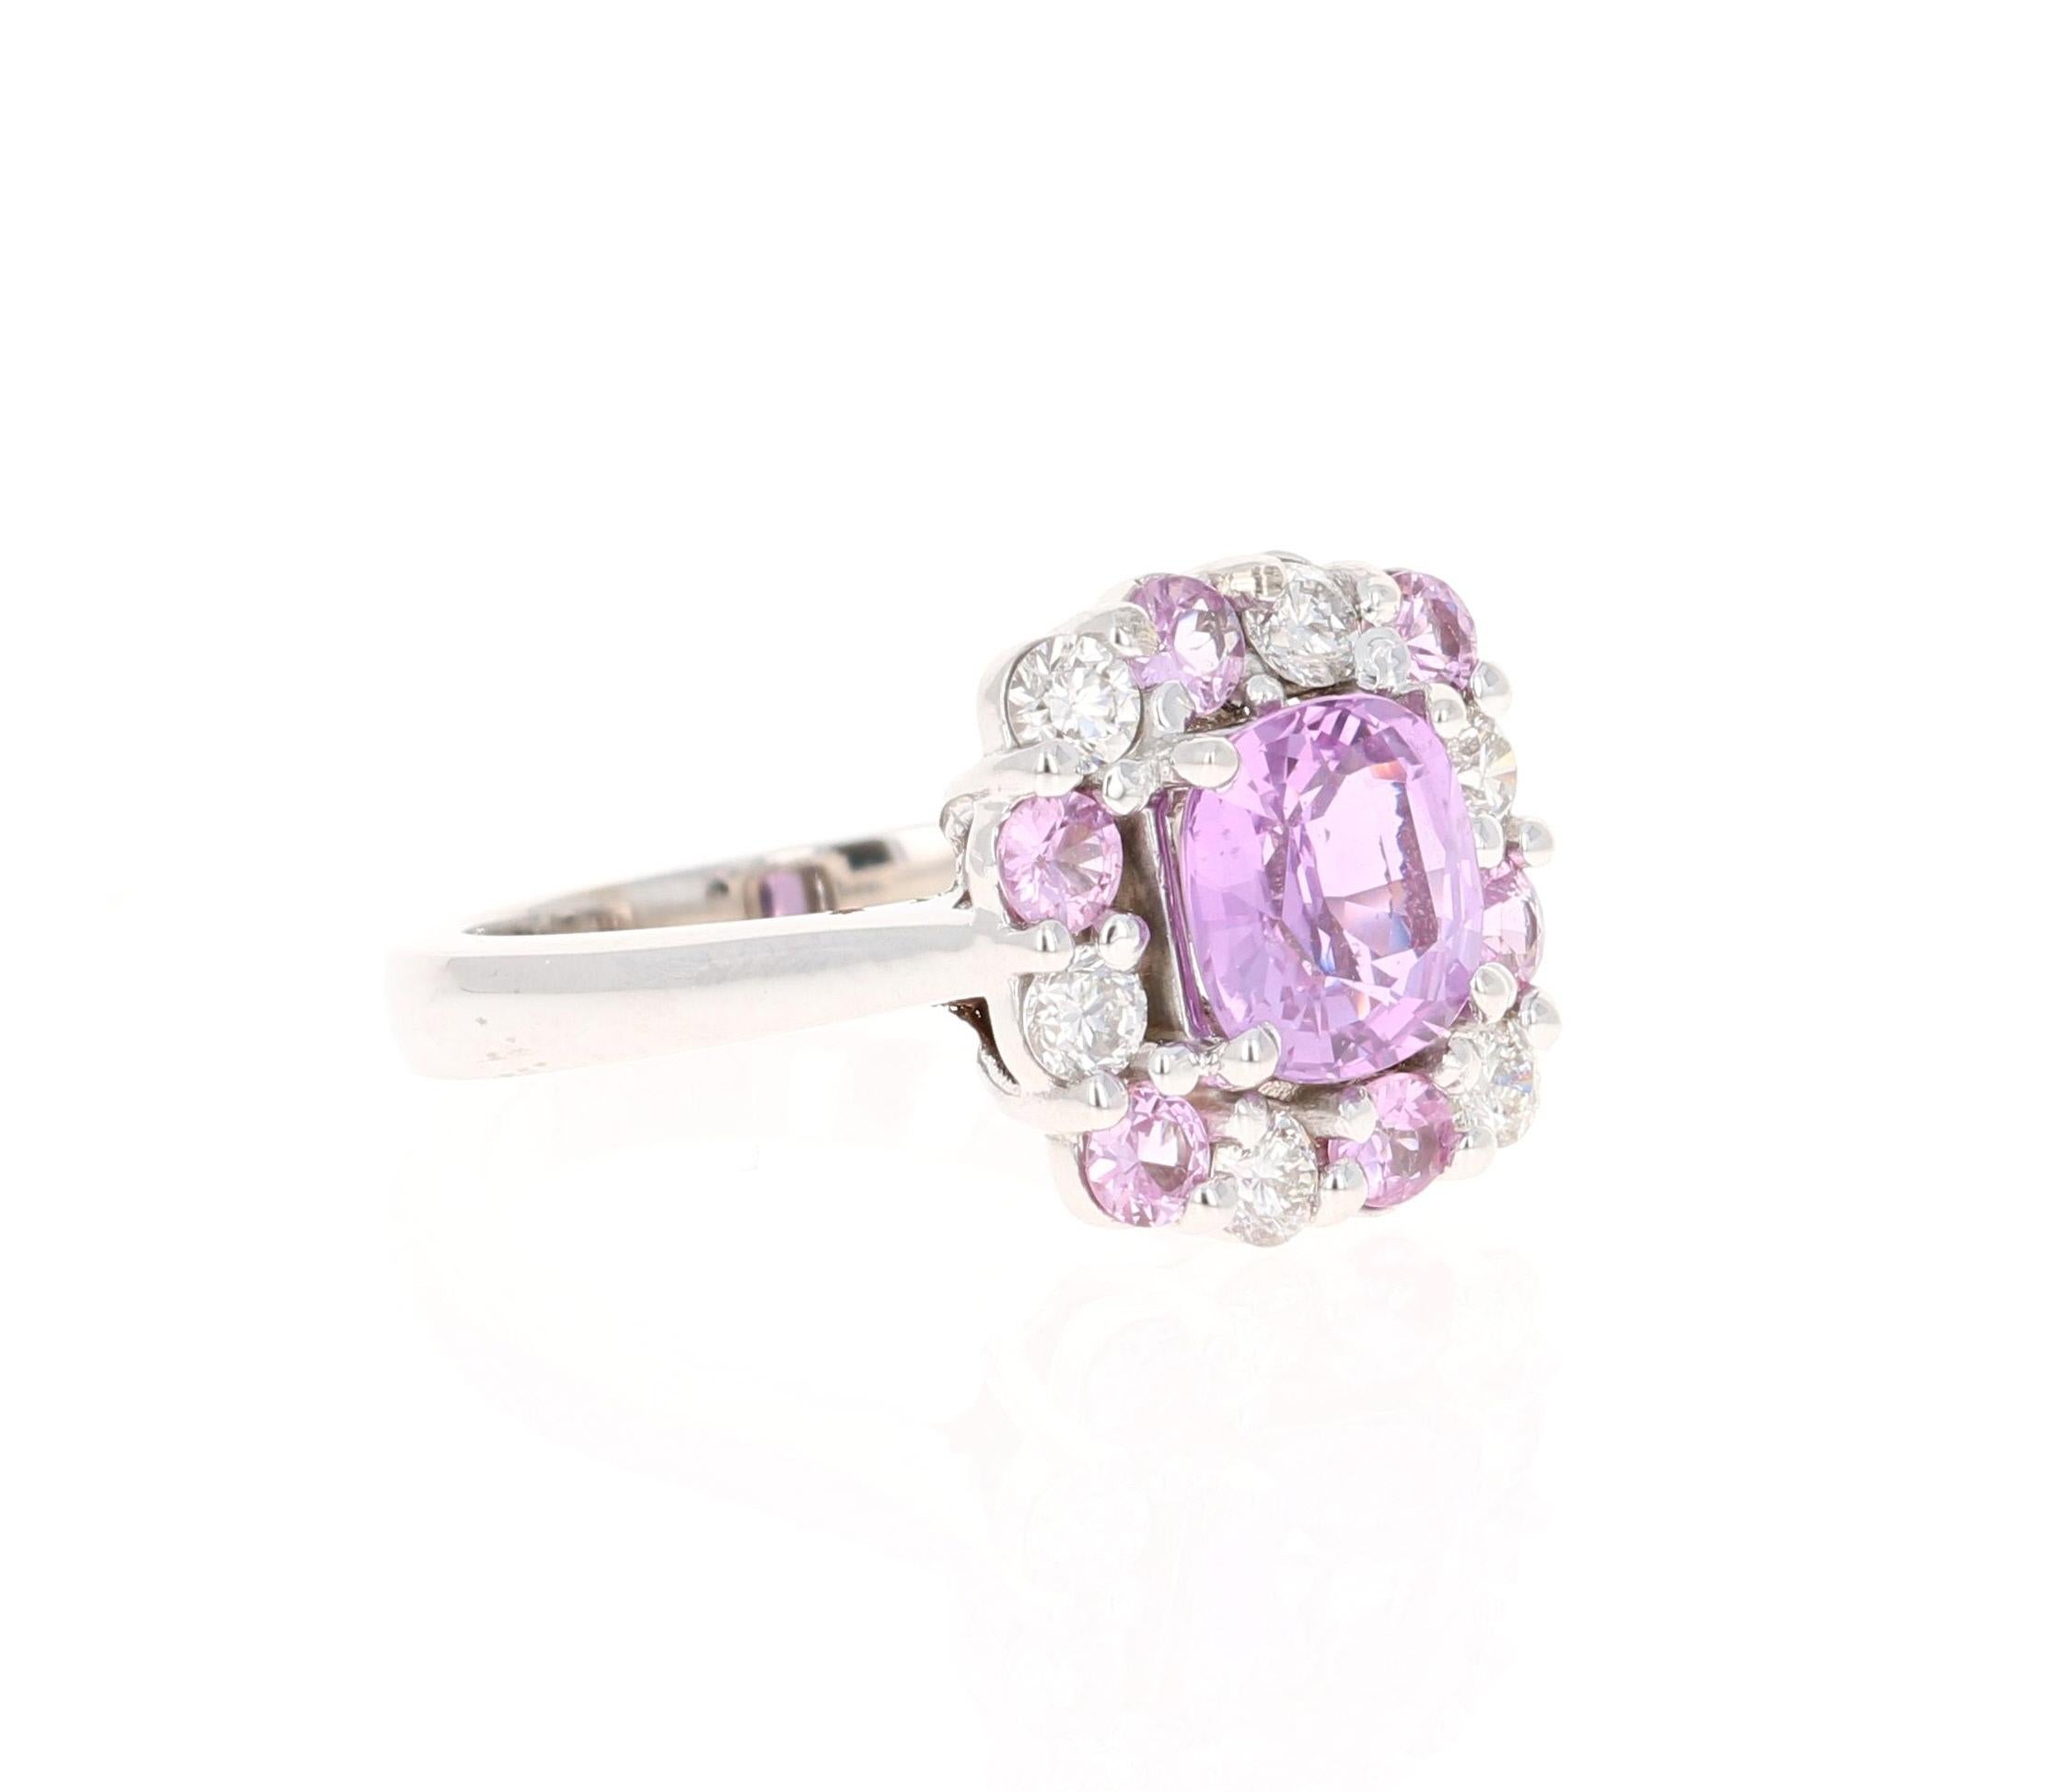 This ring has a GIA Certified Natural Cushion Cut 2.00 Carat Pink Sapphire that has no indications of heating. The GIA Certificate Number is: 5222050328. The certificate can be verified on the GIA website or you can message us and we can provide you